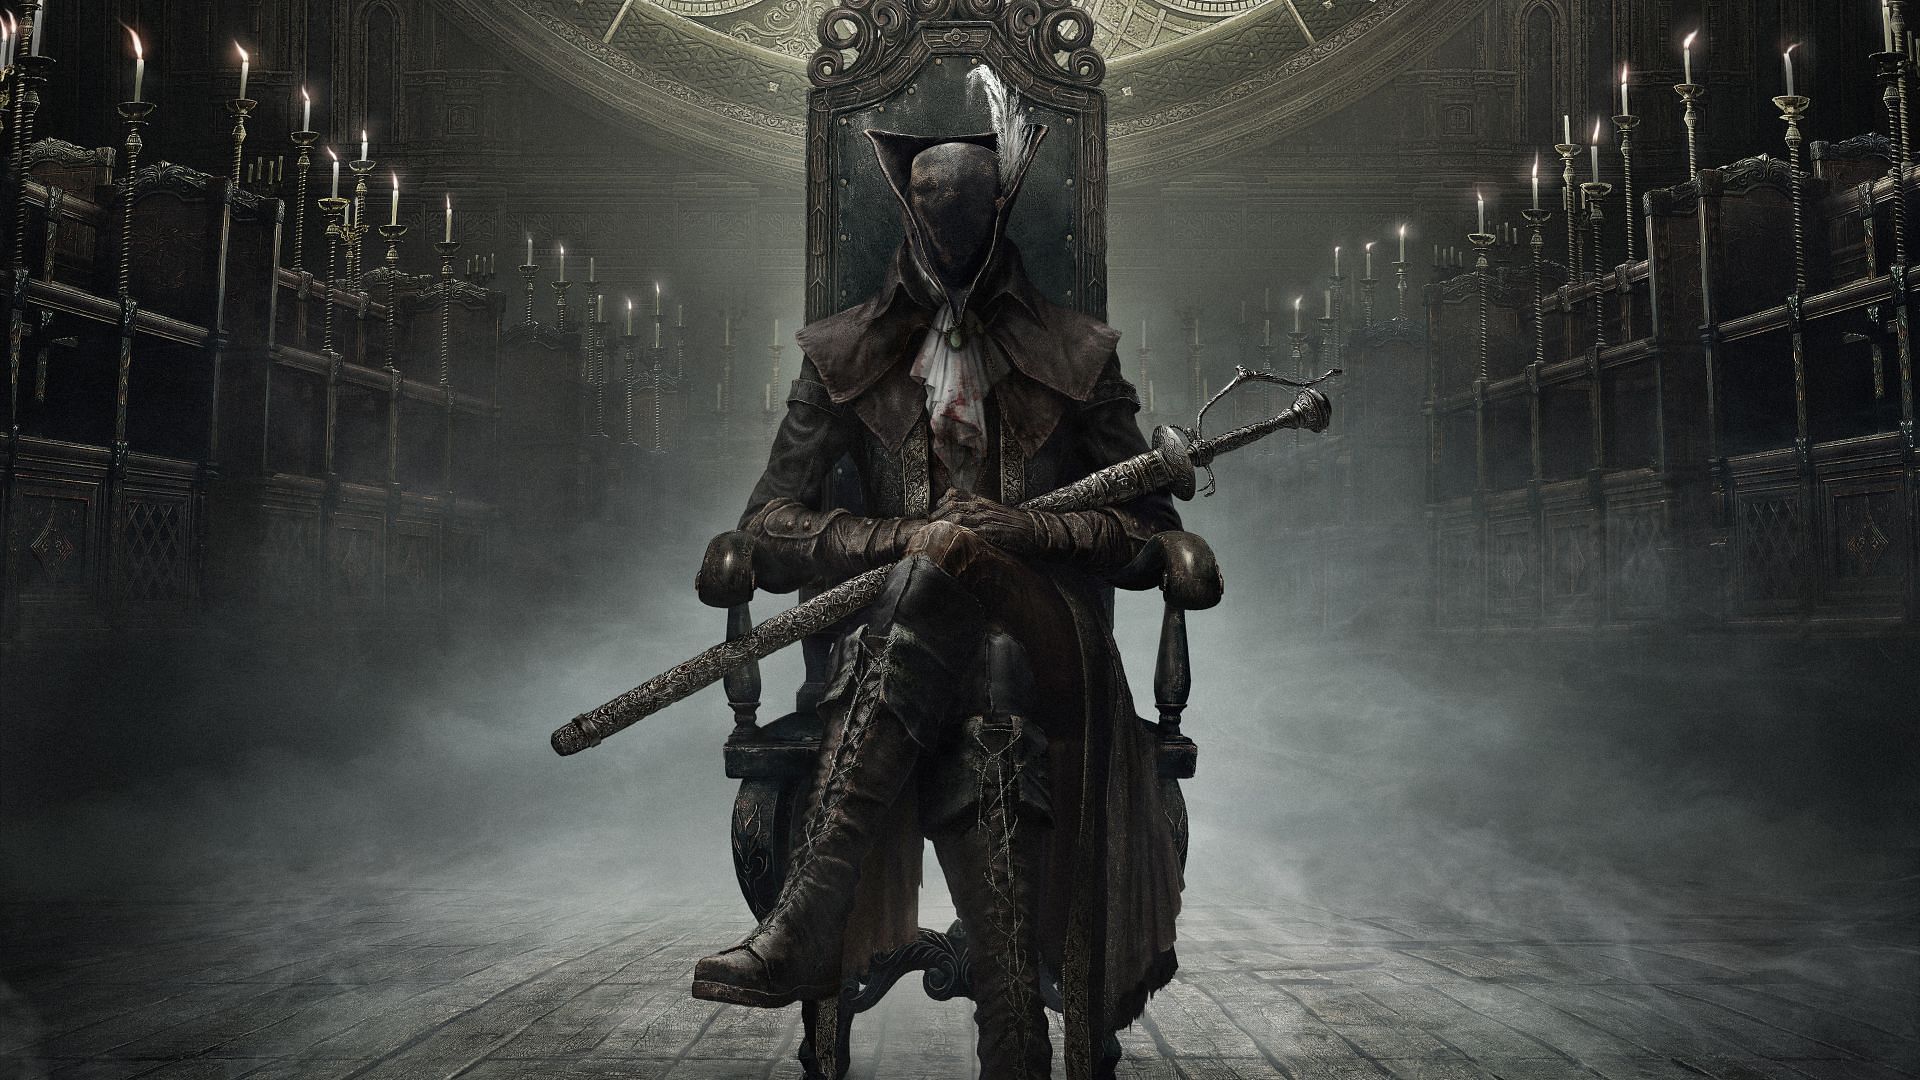 &quot;A corpse... Should be left well alone.&quot; - Lady Maria (image by From Software)